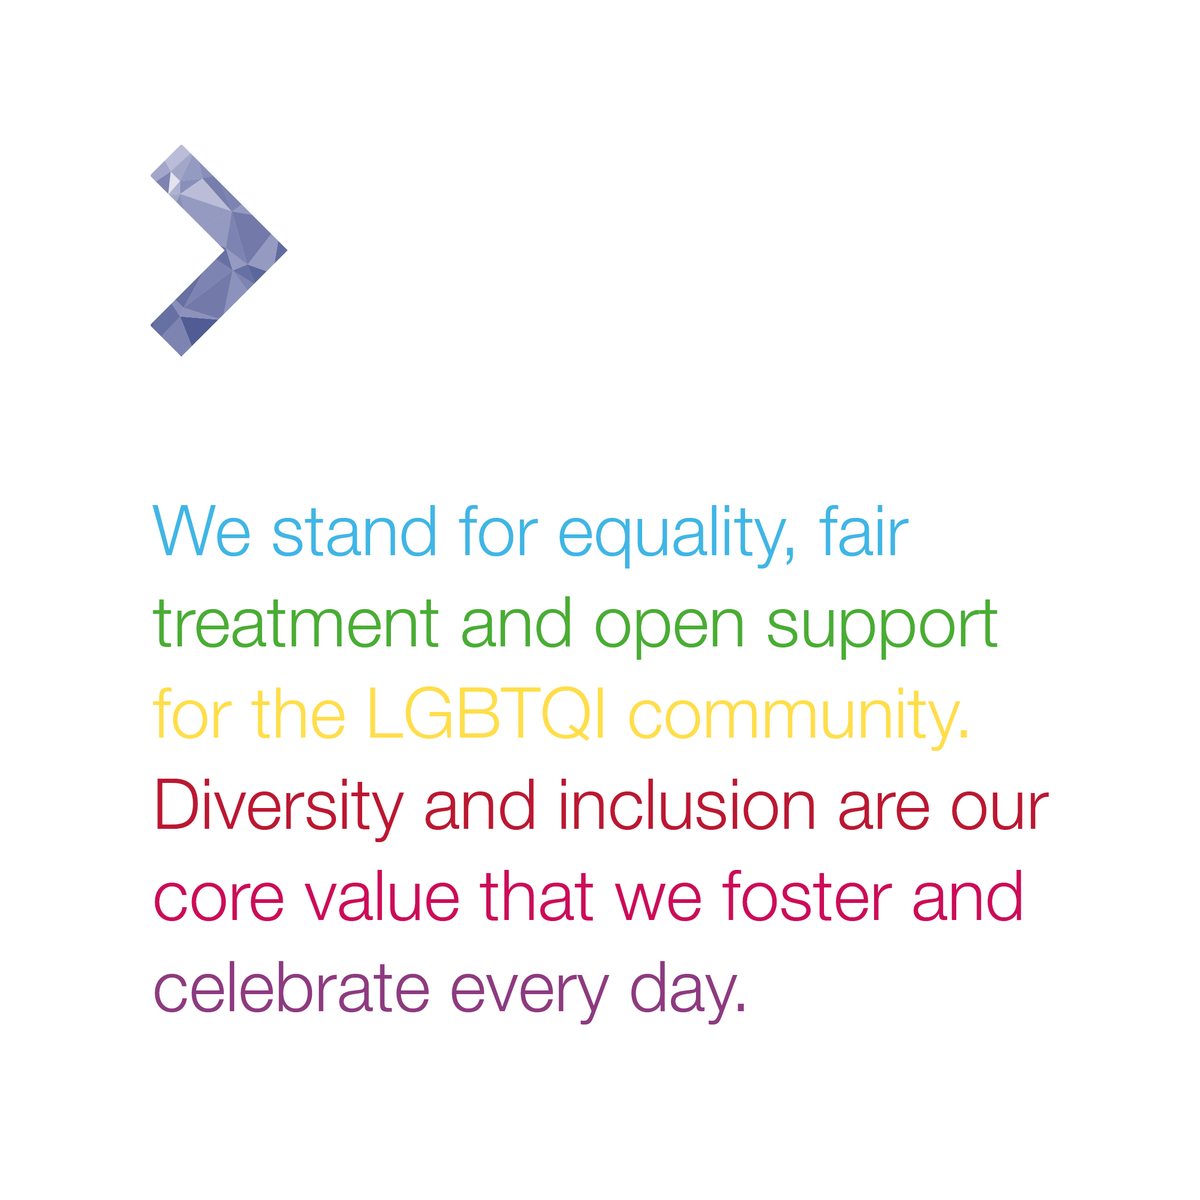 We at #MAHLE stand with the #LGBTQI community. We value the #diversity of our #workforce , foster #Equality  and fair treatment –  no matter who you are or who you #love . ⚖🌈
#teamMAHLE #StrongerTogether #pridemonth #diversitymatters #equalitymatters #weshapefuturemobility